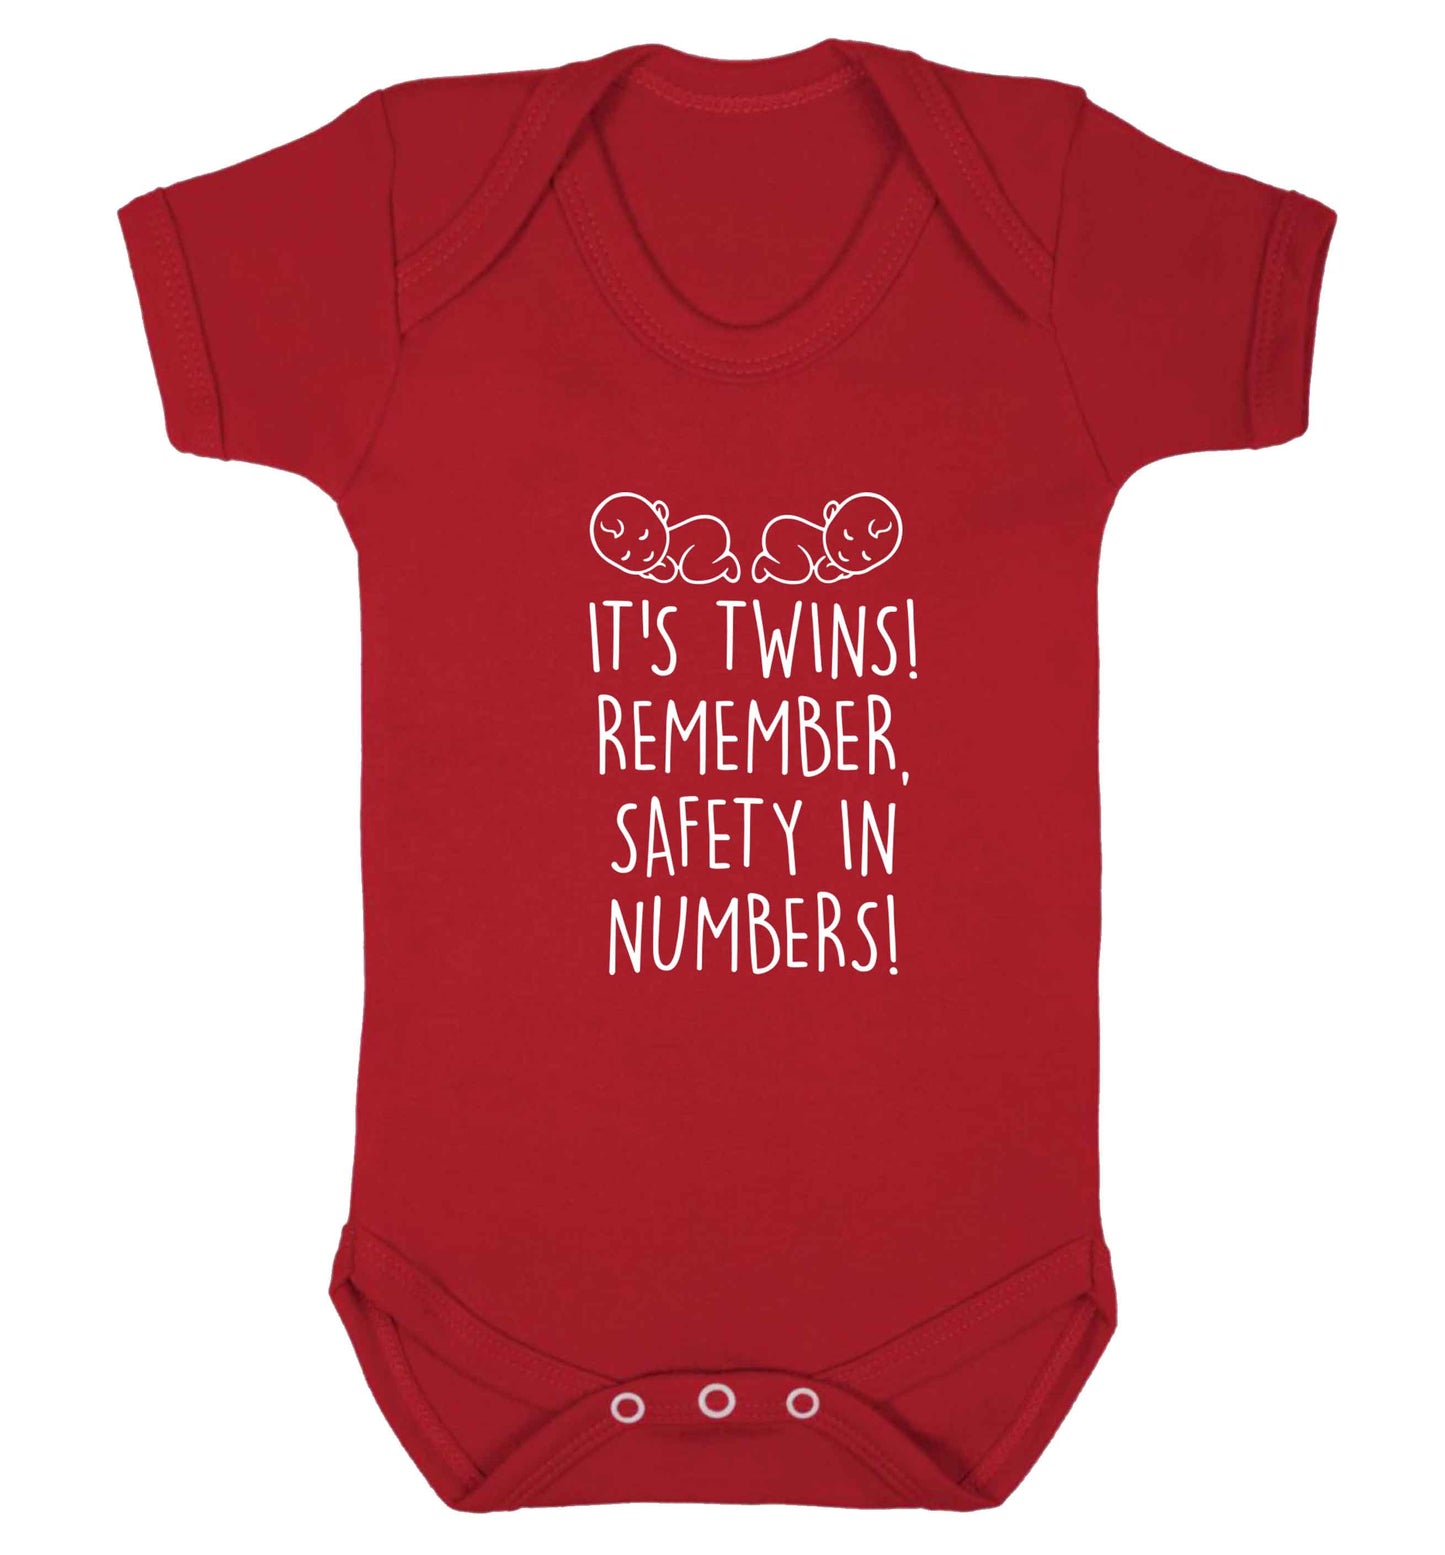 It's twins! Remember safety in numbers! baby vest red 18-24 months